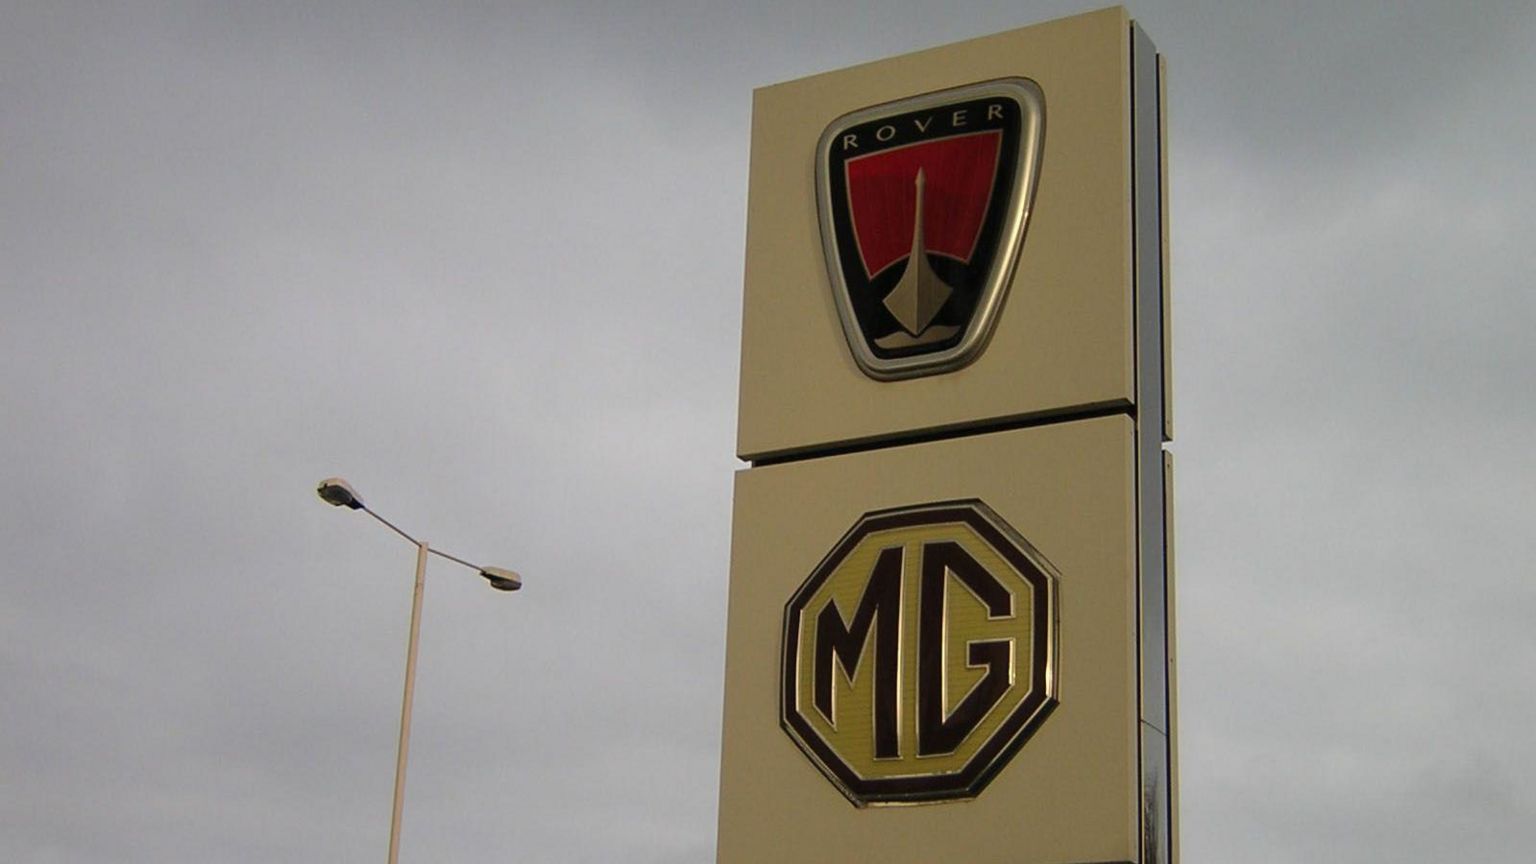 MG Rover company sign at the gates of the Longbridge plant in Birmingham, March 2005